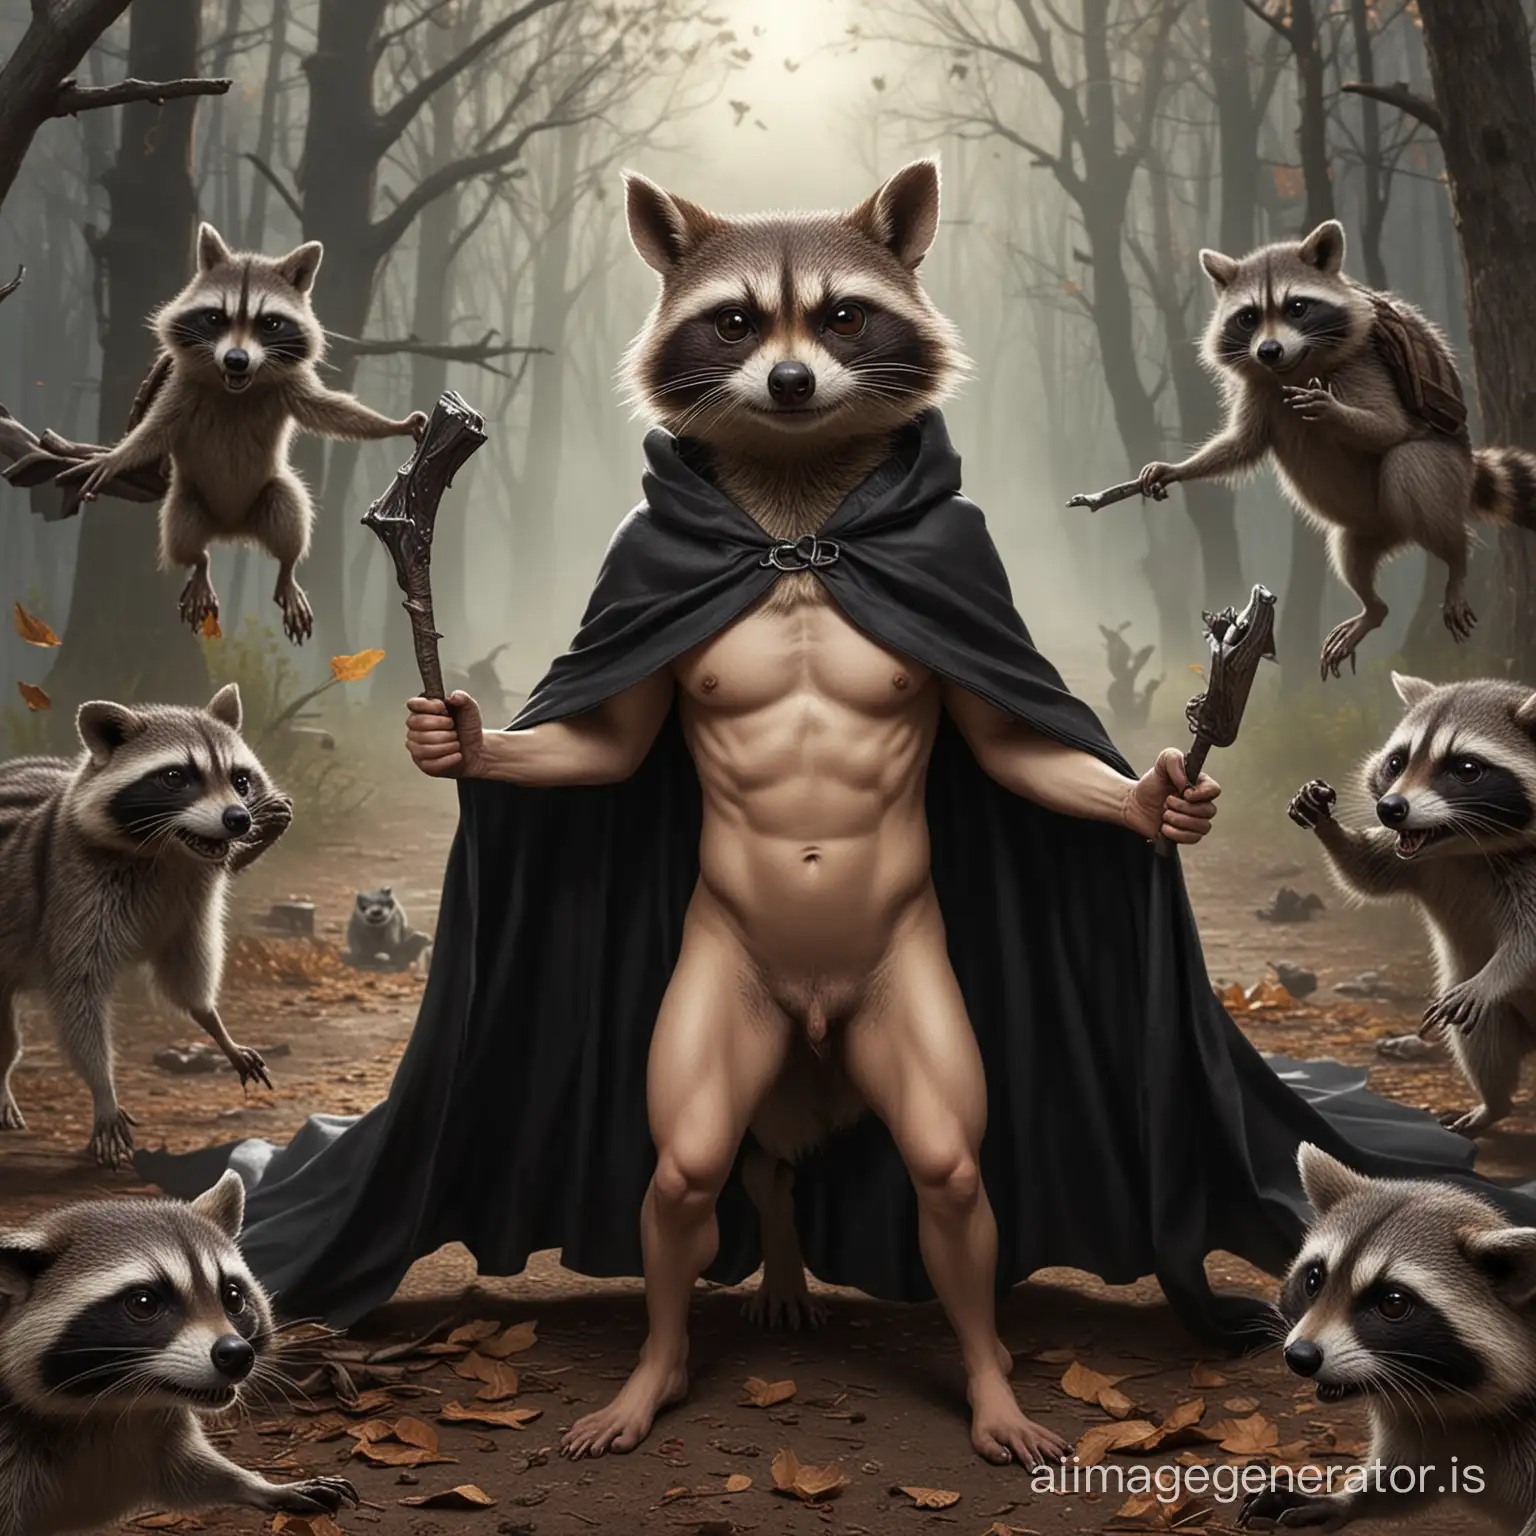 draw how a naked sparrow unfolds a black cloak in front of evil Raccoons